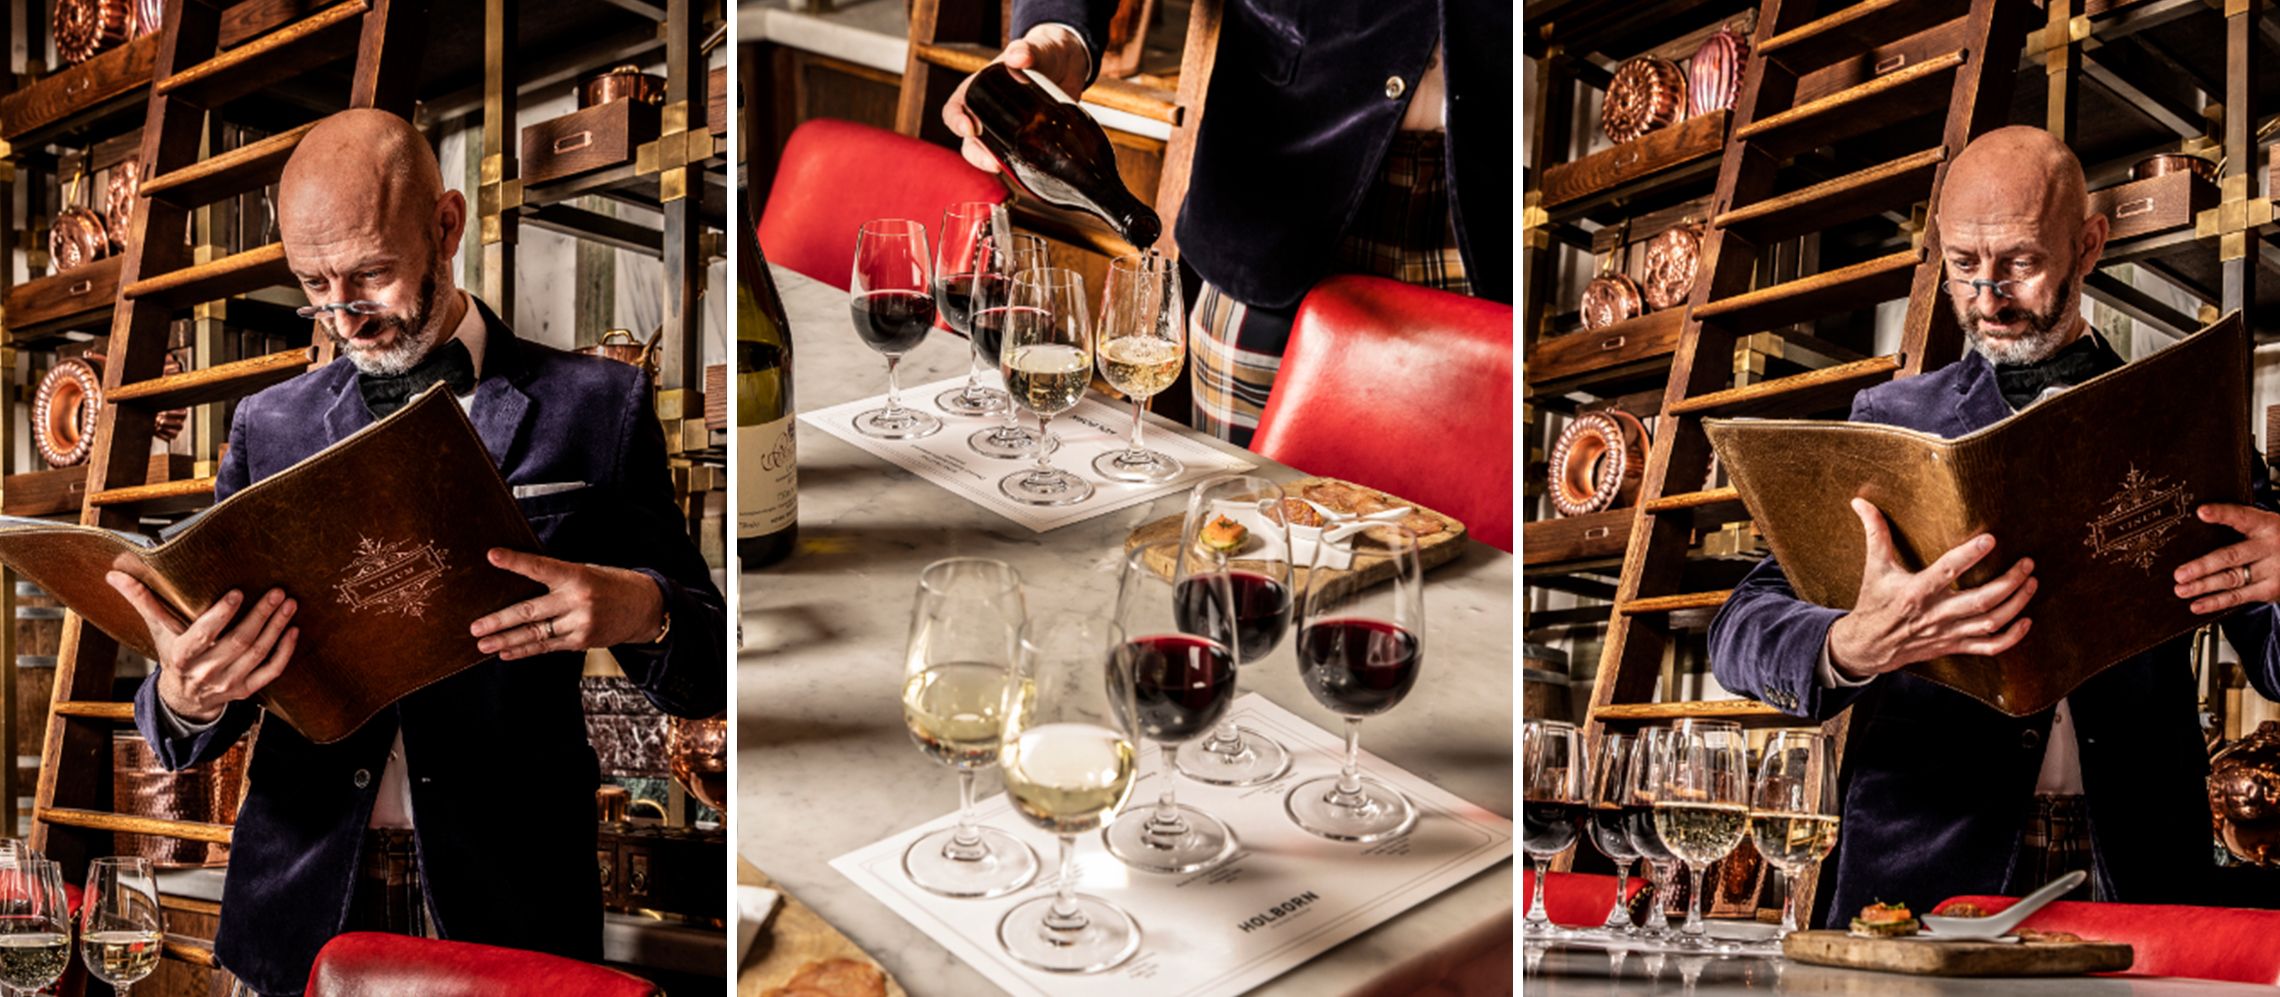 Photo for: 30 Minutes with the Rosewood's Head Sommelier, Michael Raebel